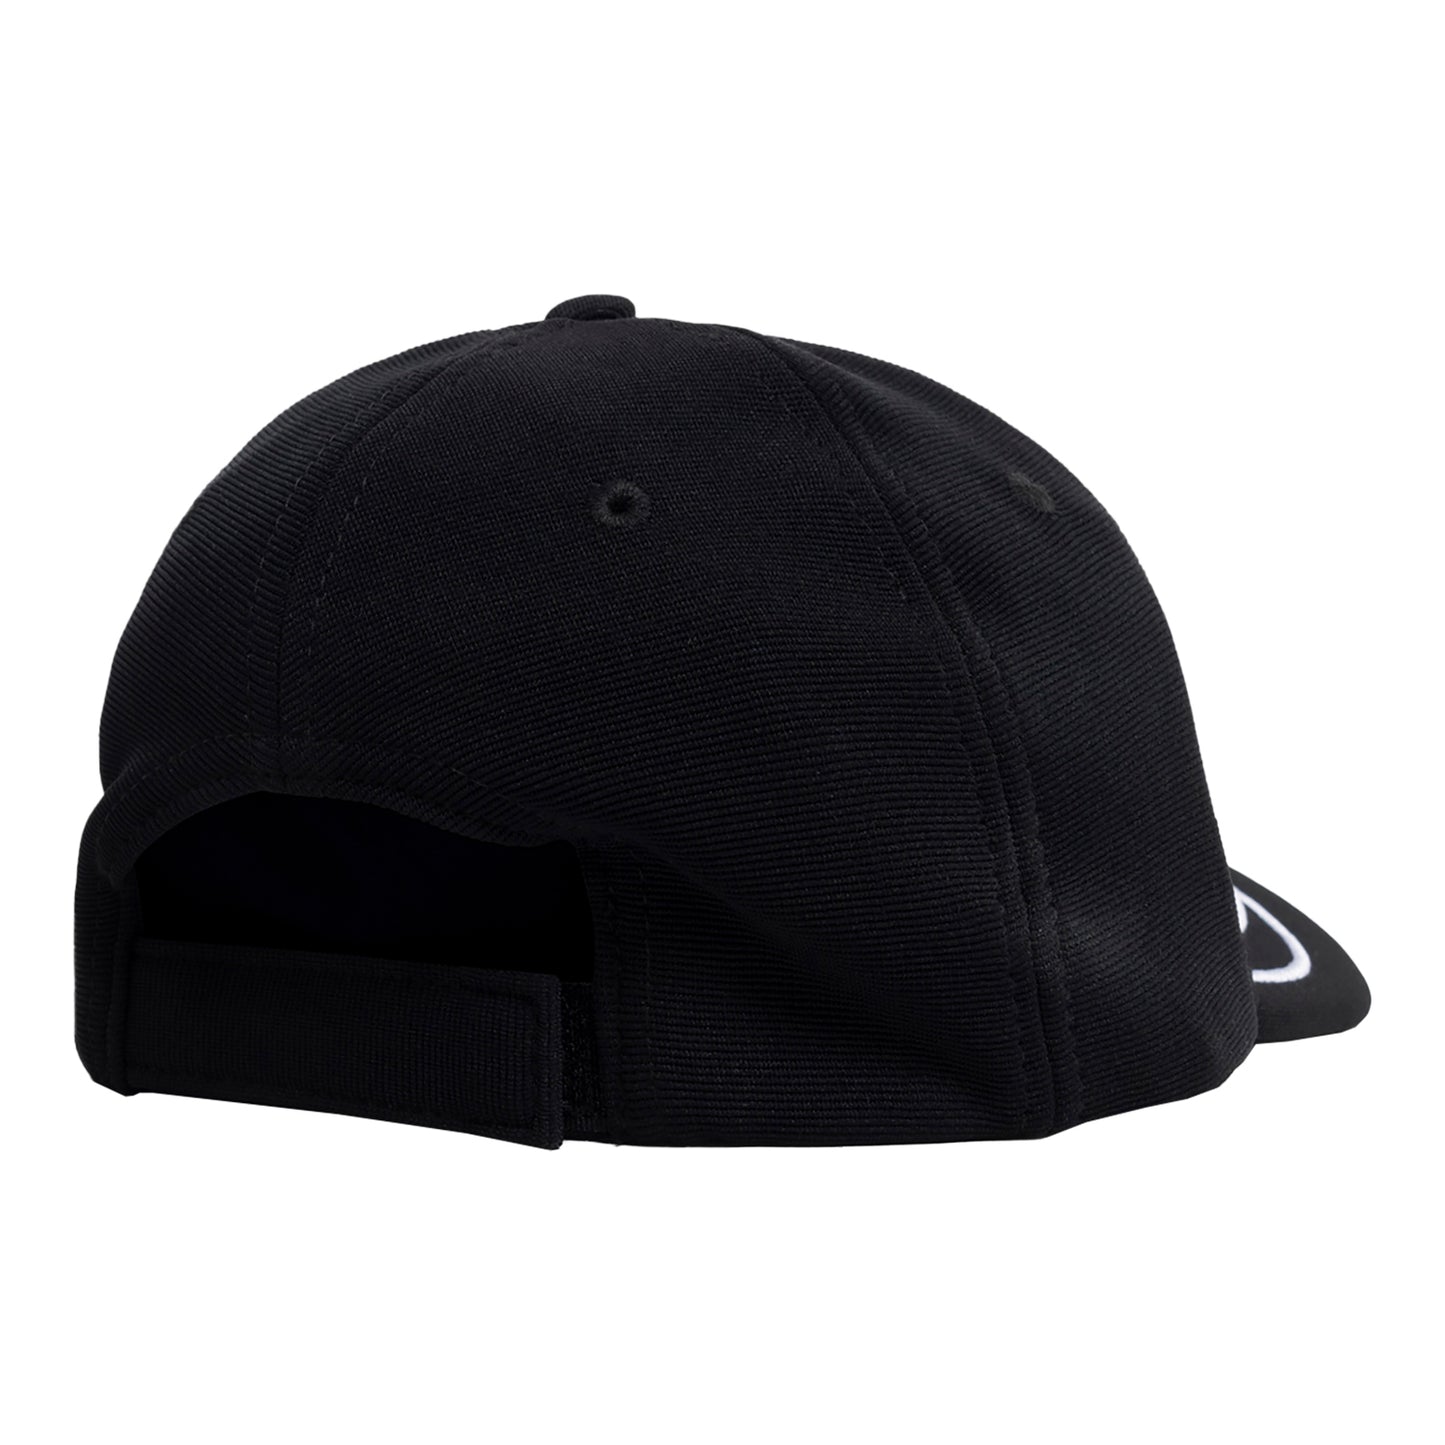 Penrith Panthers Adult Supporter Cap